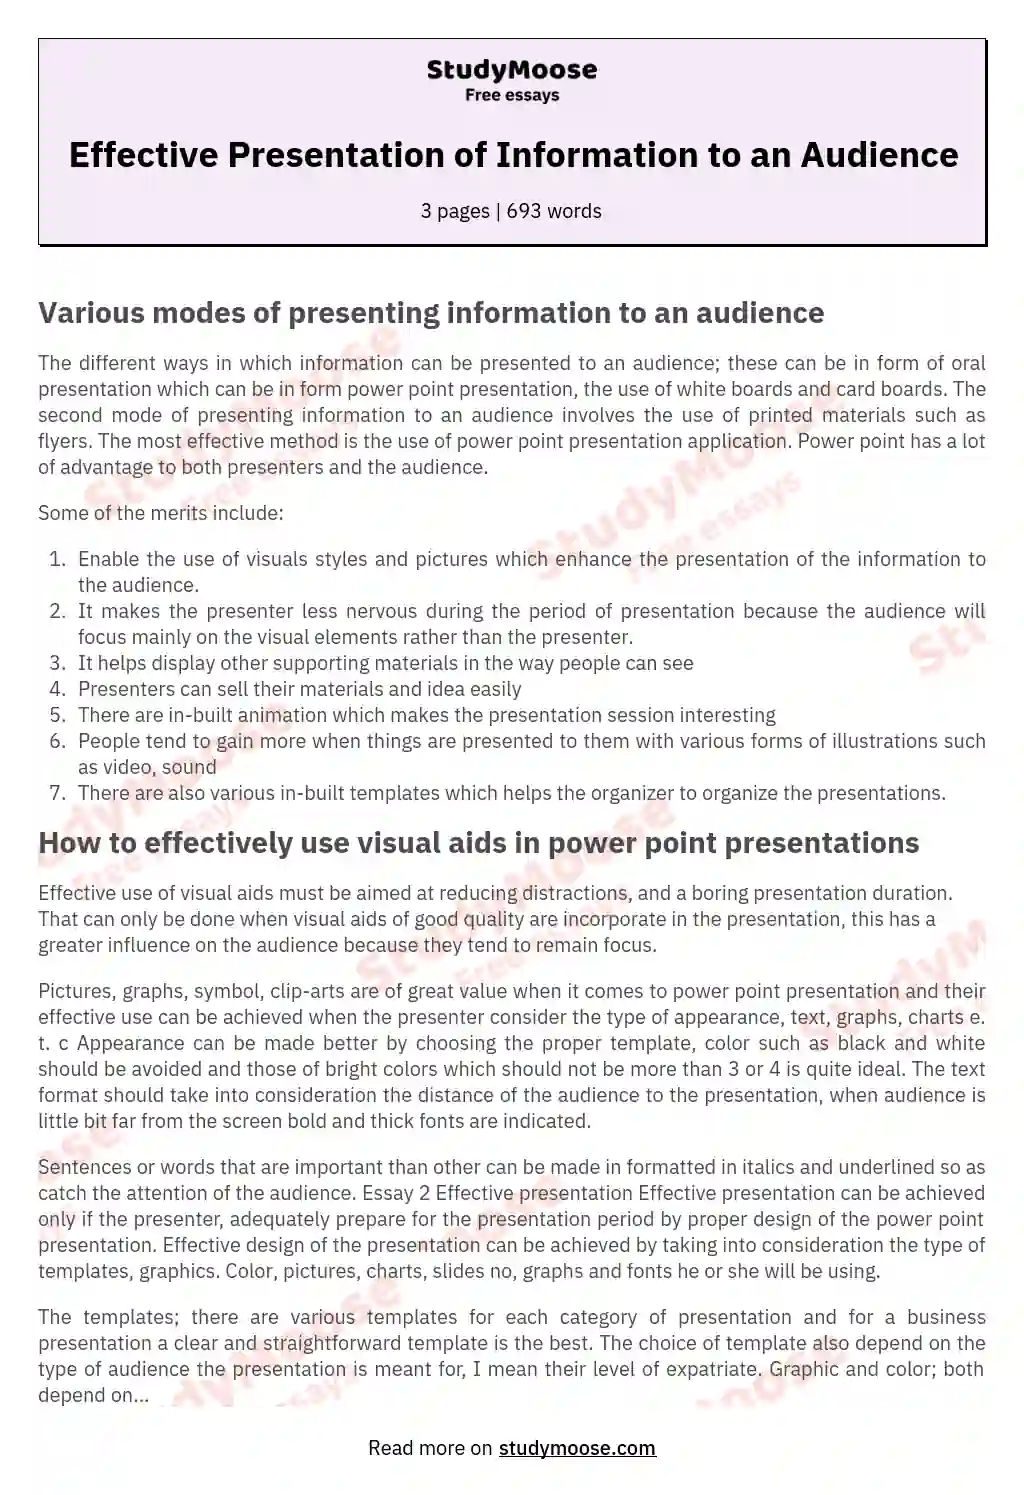 Effective Presentation of Information to an Audience essay